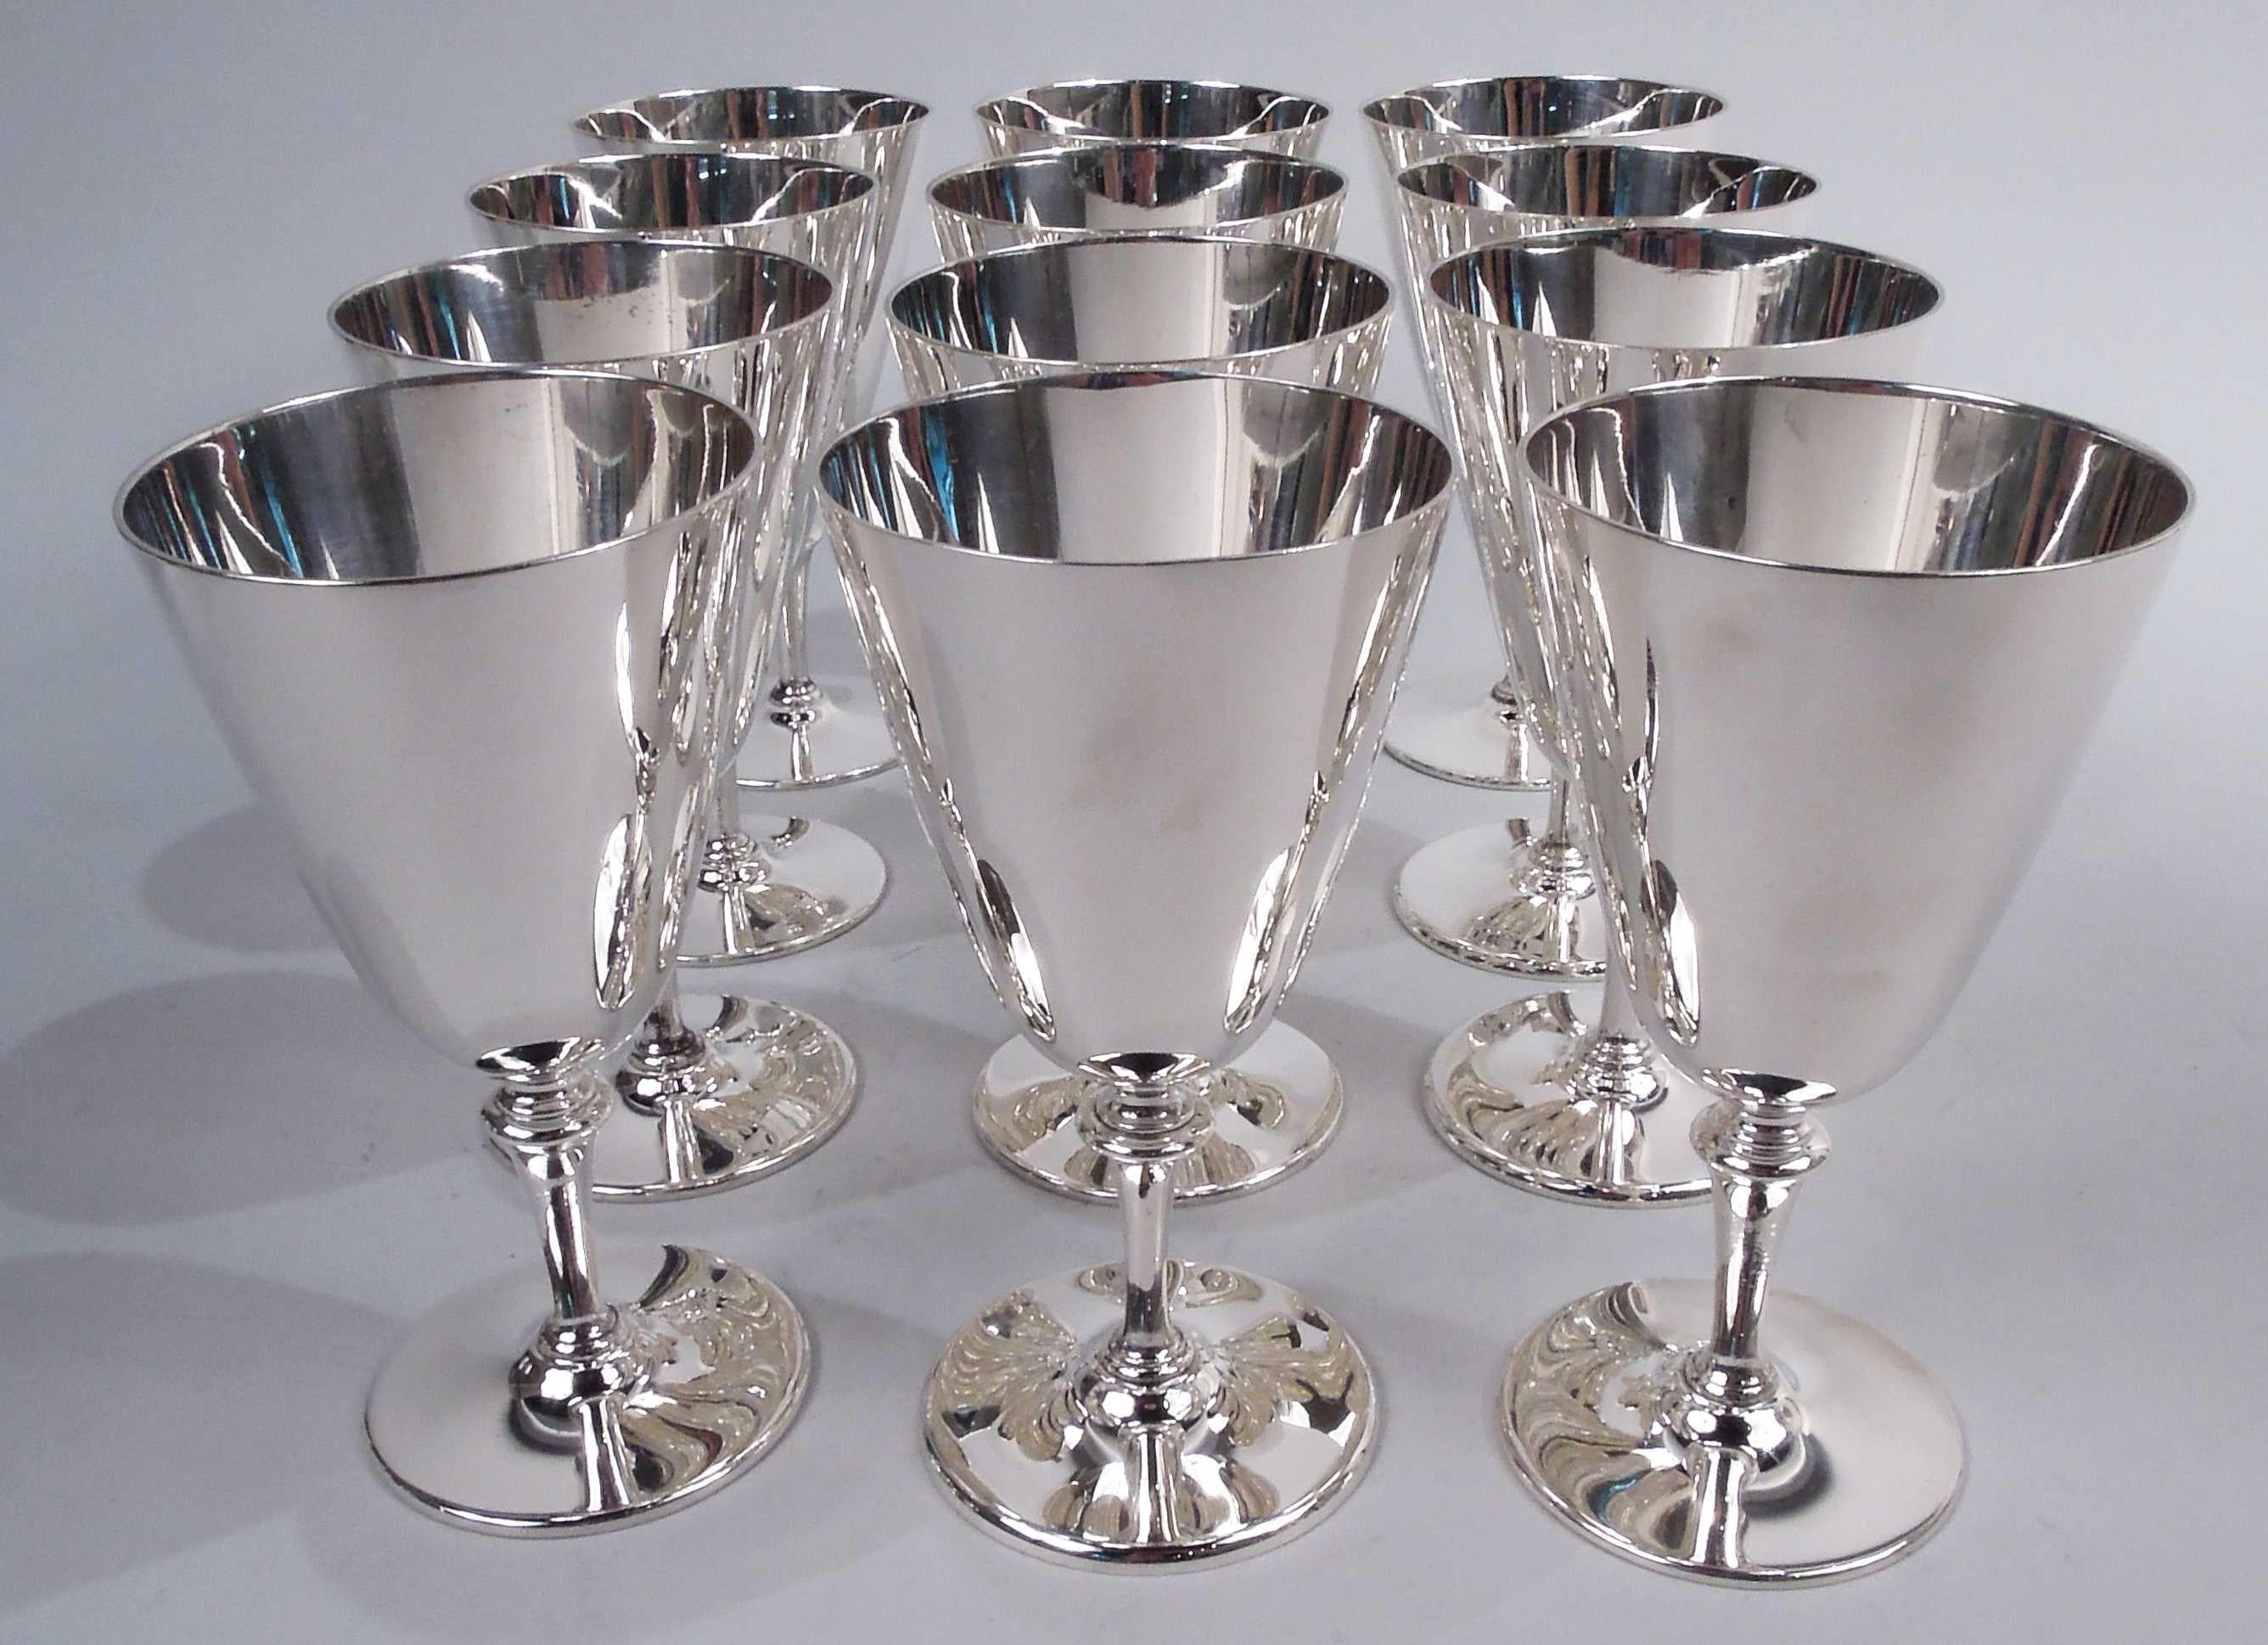 Set of 12 Modern sterling silver goblets. Made by Tiffany & Co. in New York, ca 1940. Each: Conical bowl mounted to tapering stem; foot round and gently raised. Easy grip with nice balance. Fully marked including maker’s stamp and pattern no. 20168.